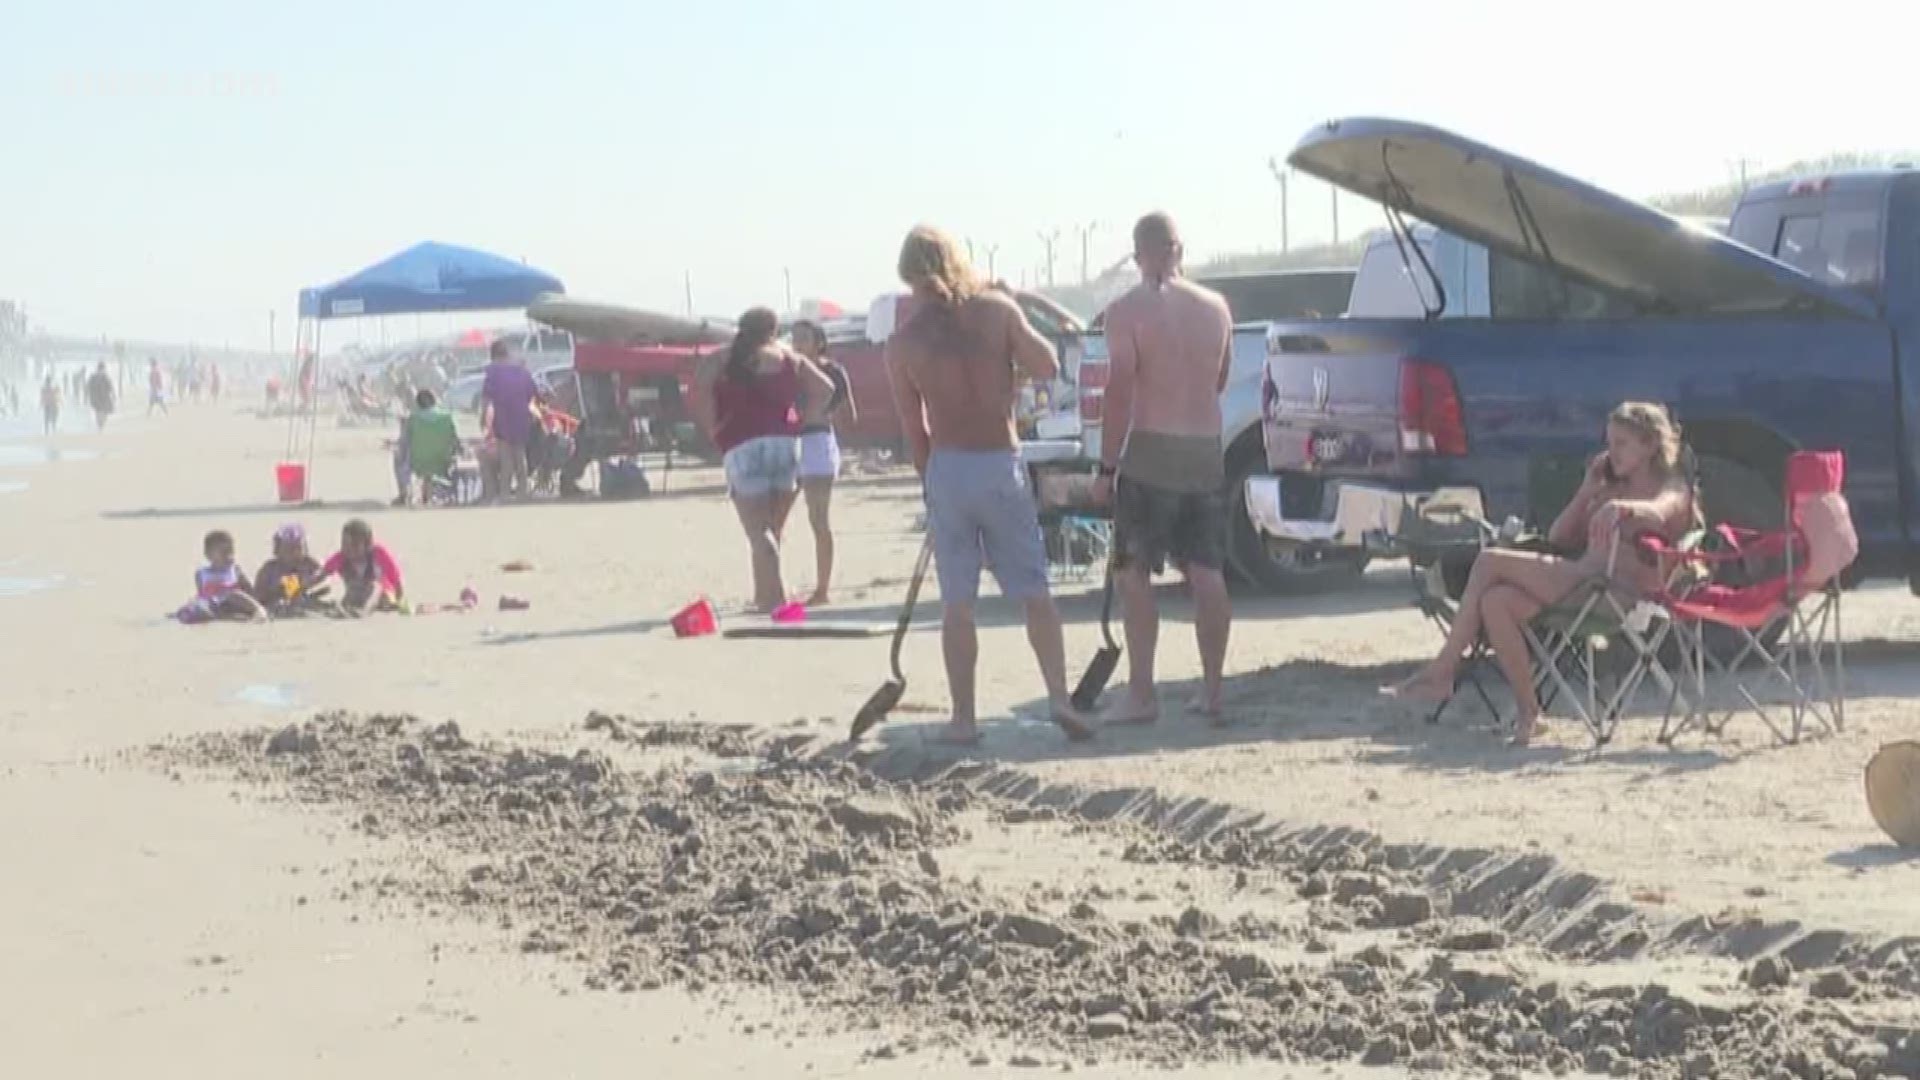 The Port Aransas Police Department expects more massive crowds this Spring Break.

According to Port Aransas Police Chief Scott Burroughs, Spring Break is going to be a two-week long event with the majority of schools being off between March 9-16 and others off from March 16-24.